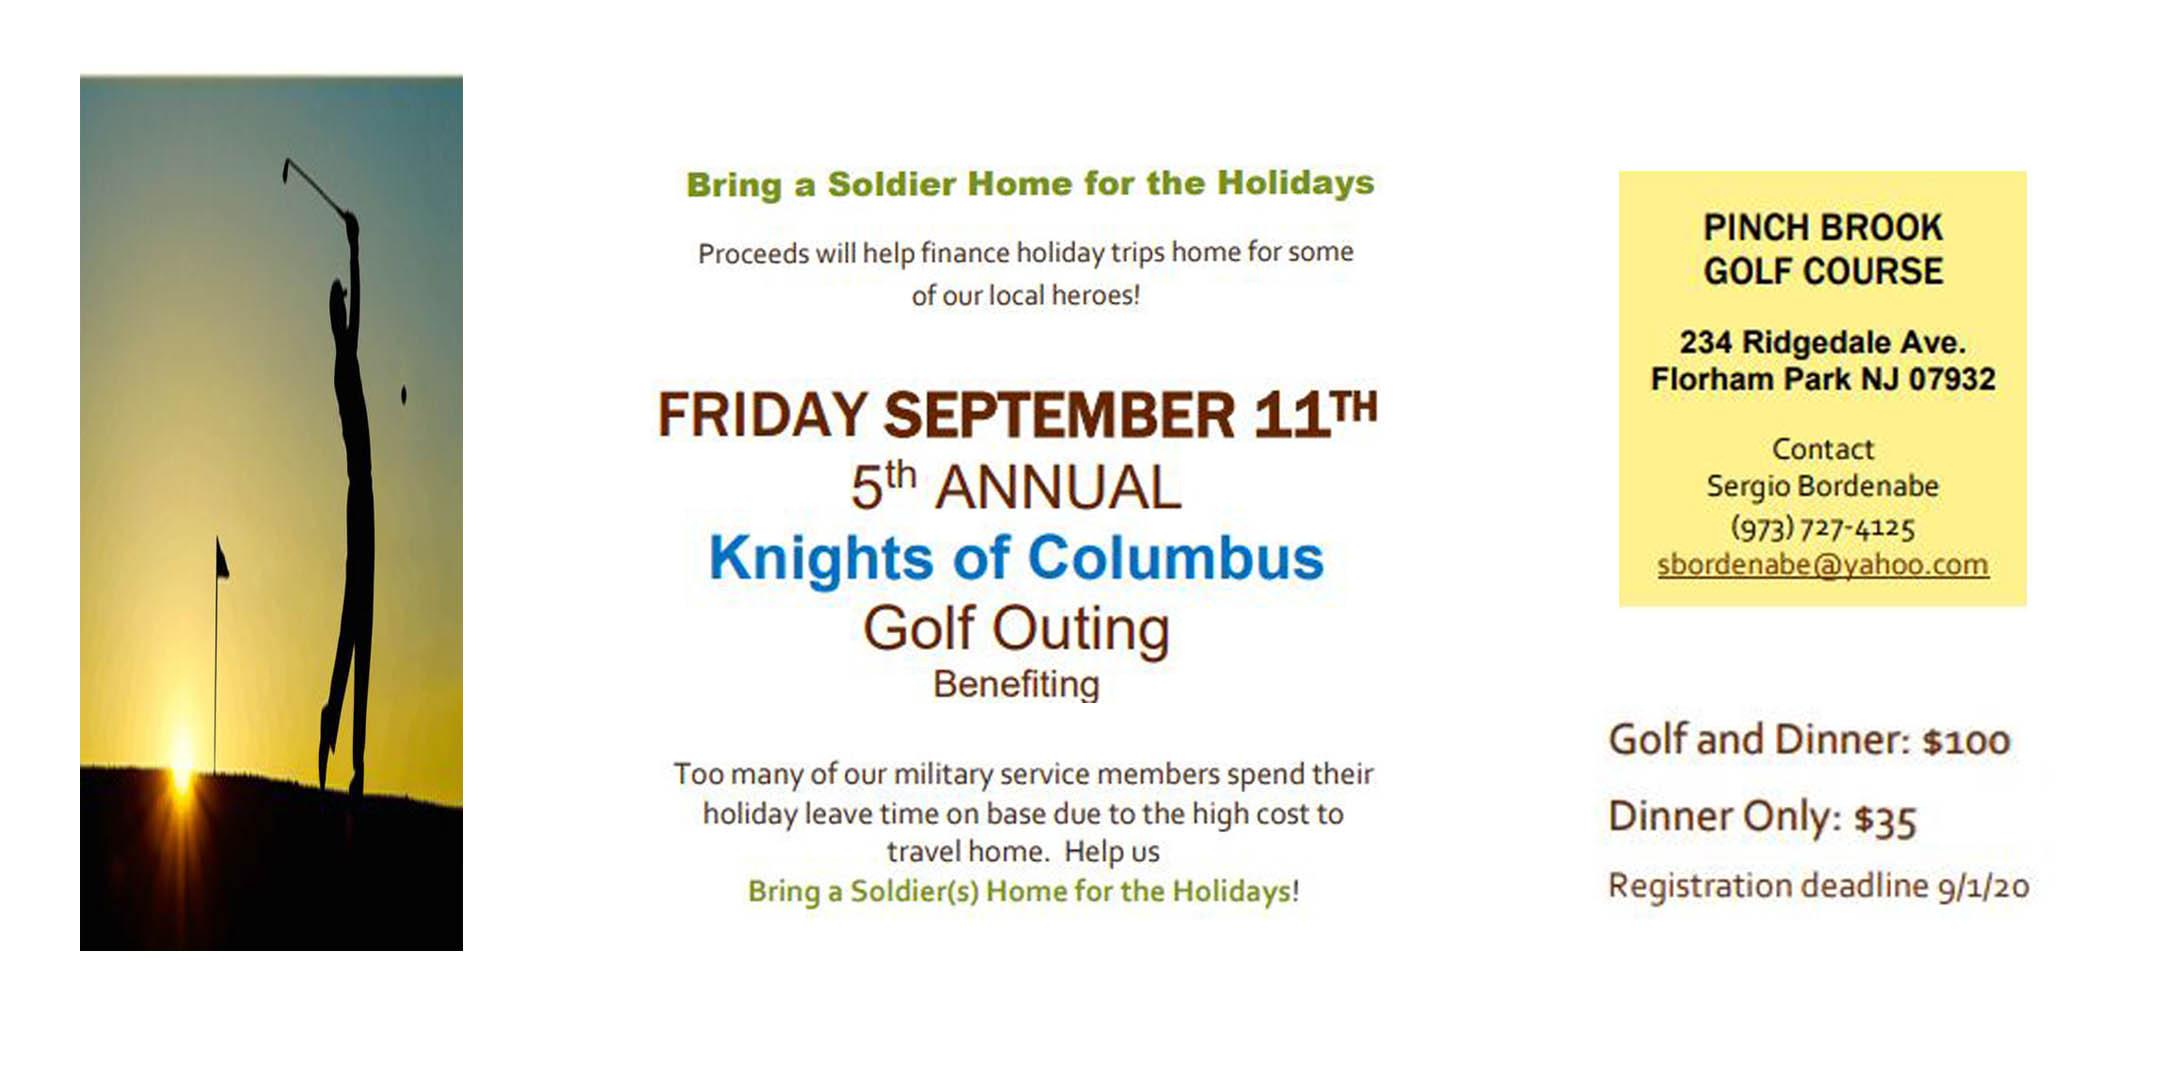 Golf Outing Benefiting Bring a Soldier Home for the Holidays